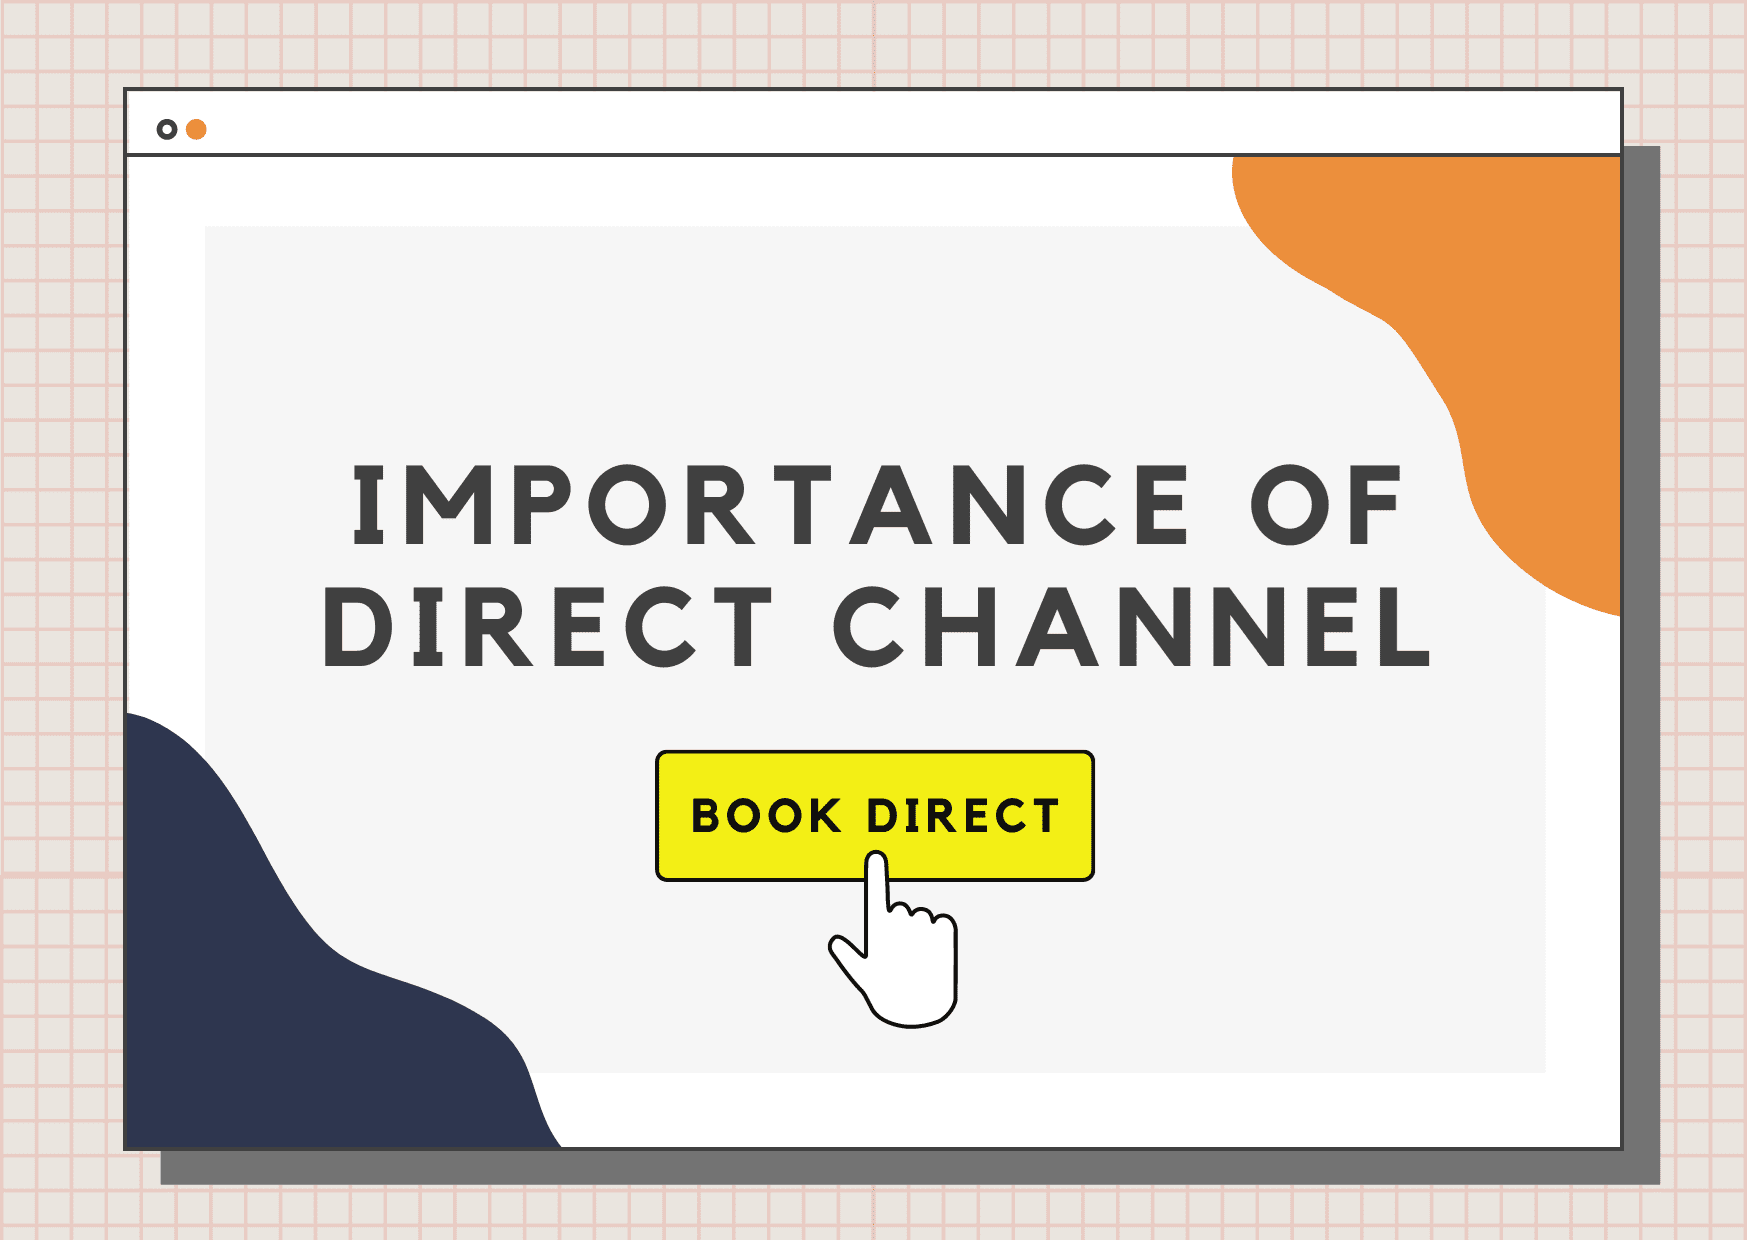 The Importance of Direct Channel